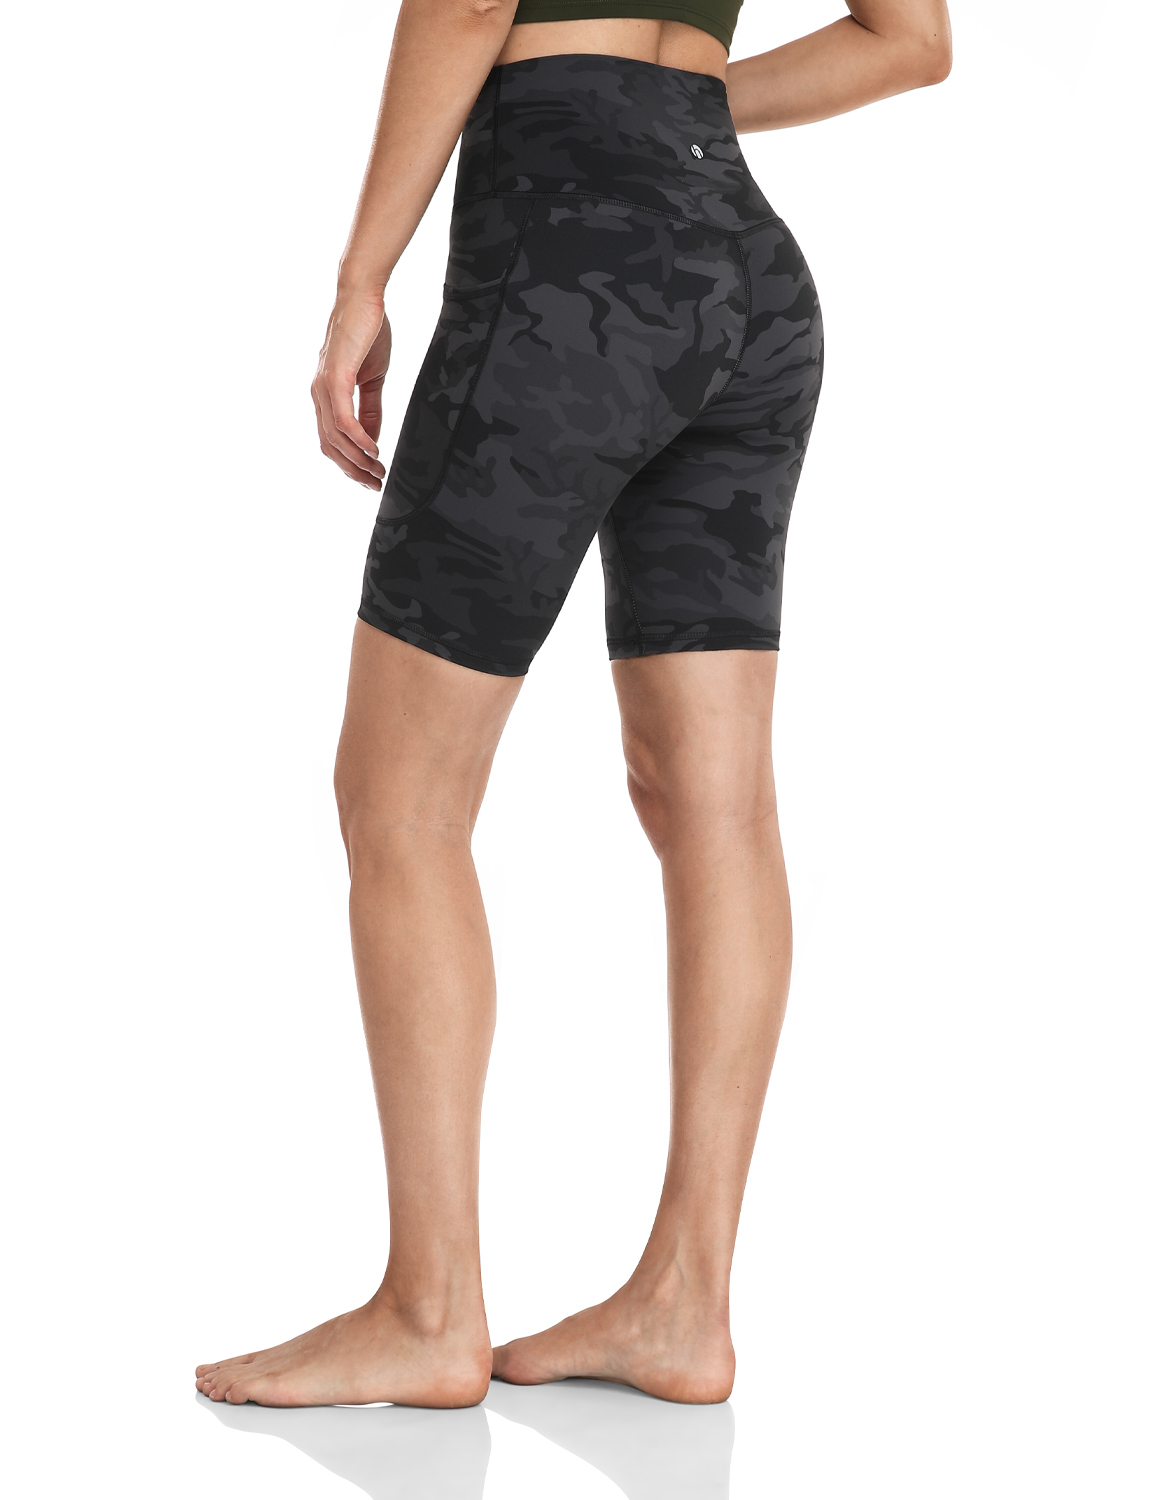 HeyNuts Essential Biker Shorts with Side Pockets for Women, High